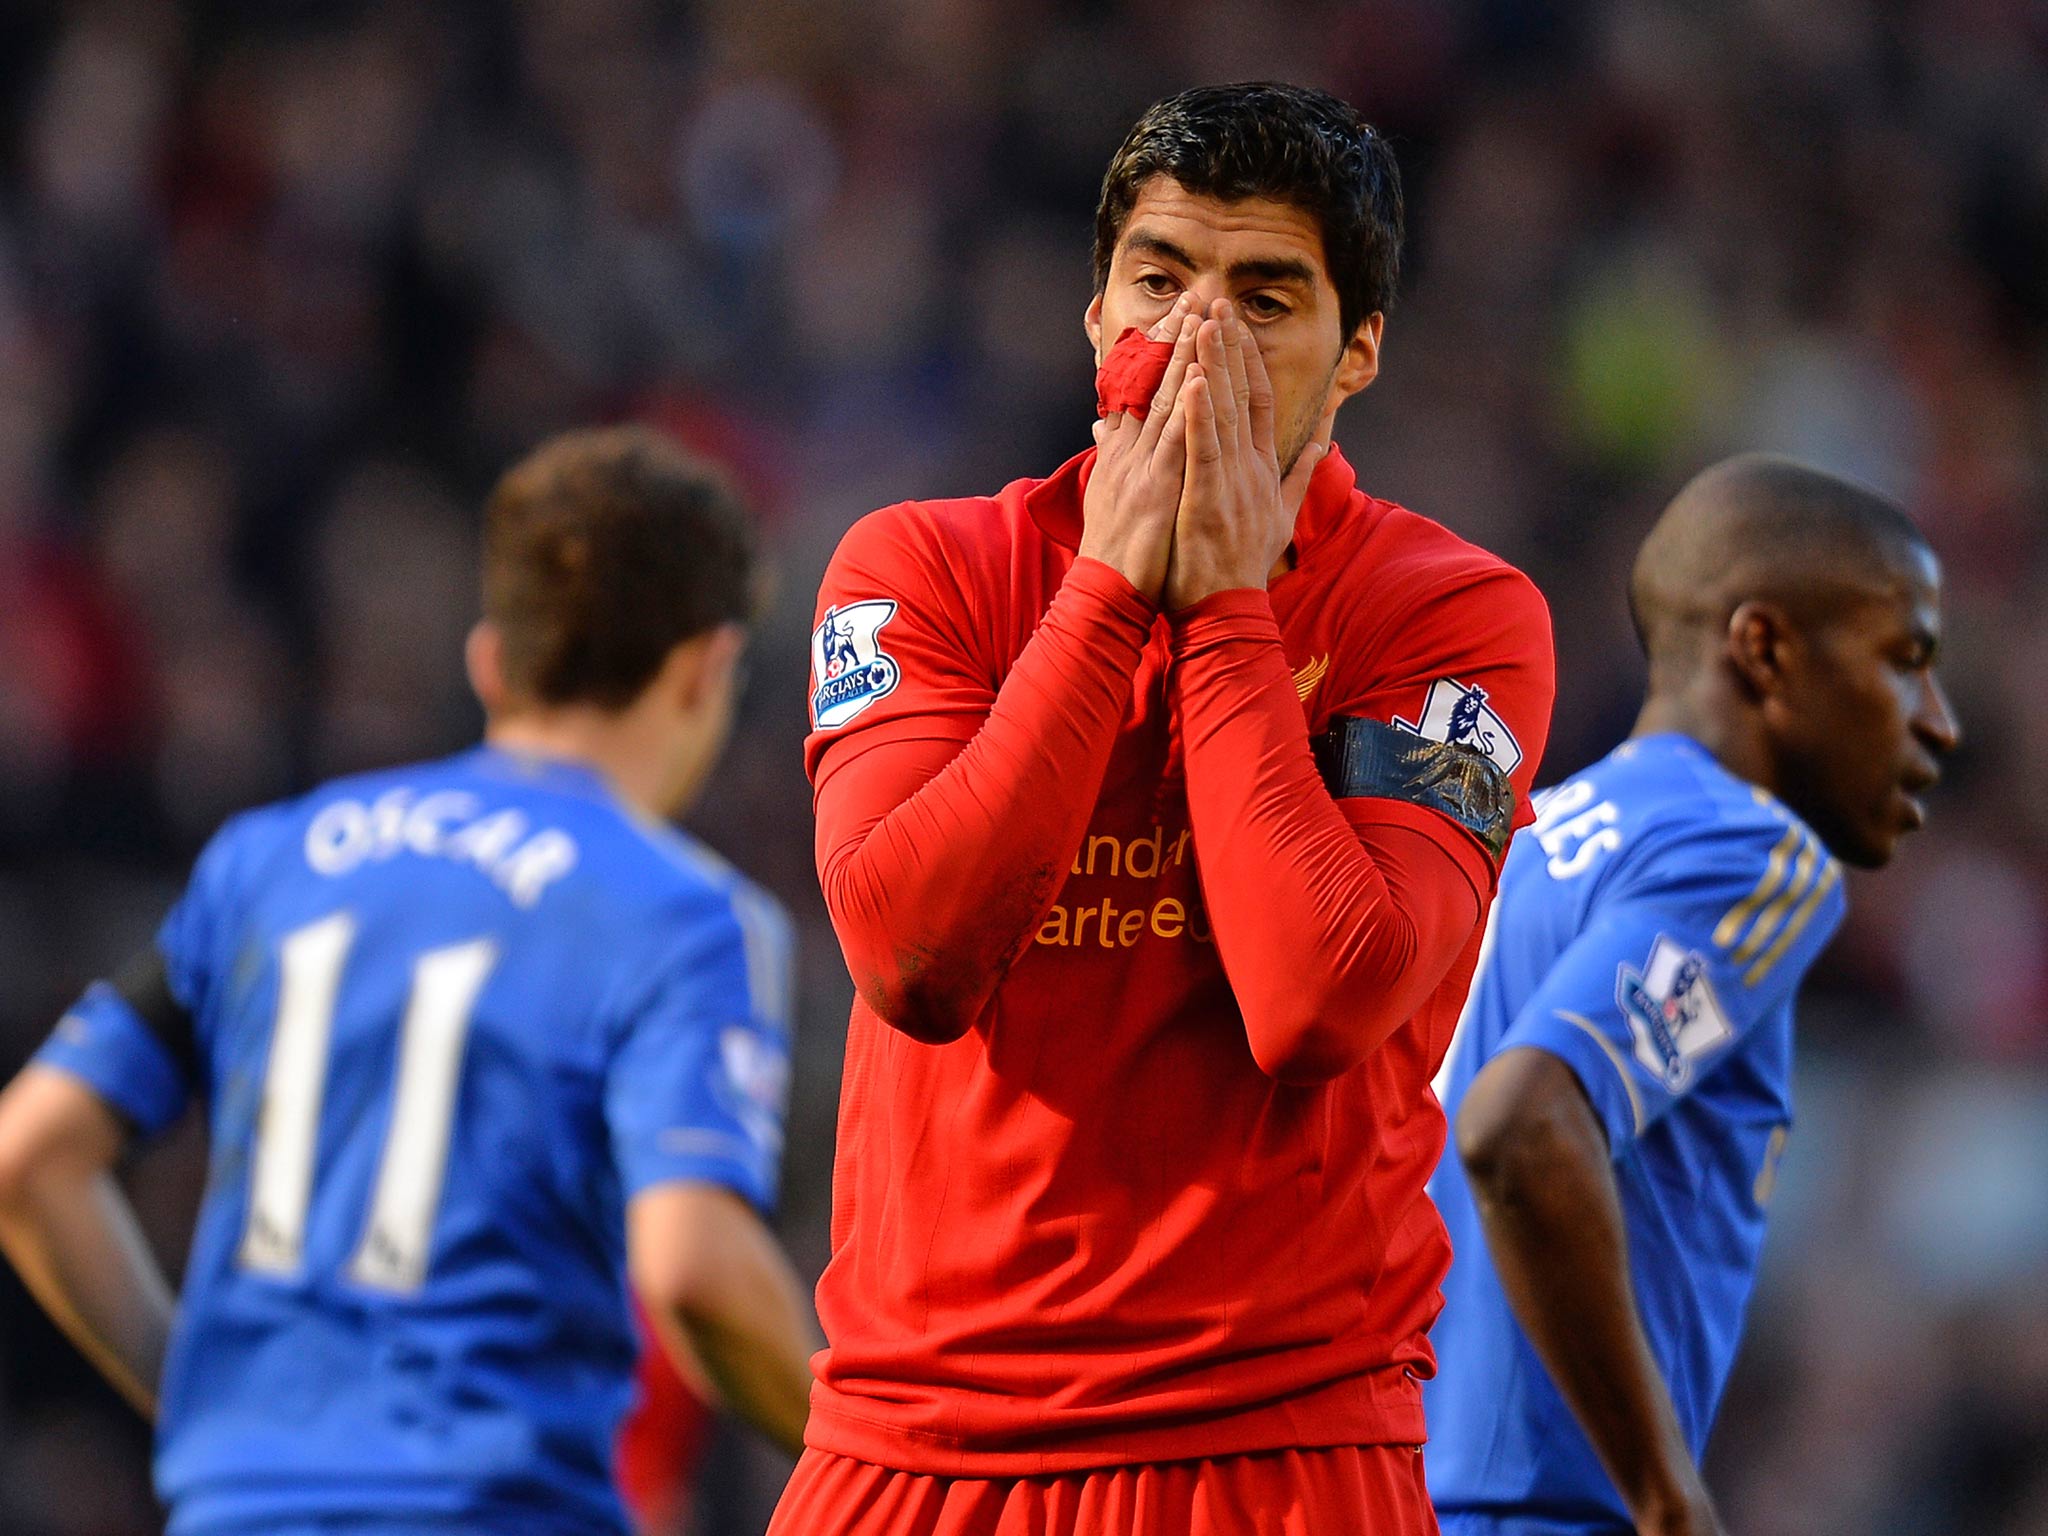 Luis Suarez pictured in the 2-2 draw between Liverpool and Chelsea